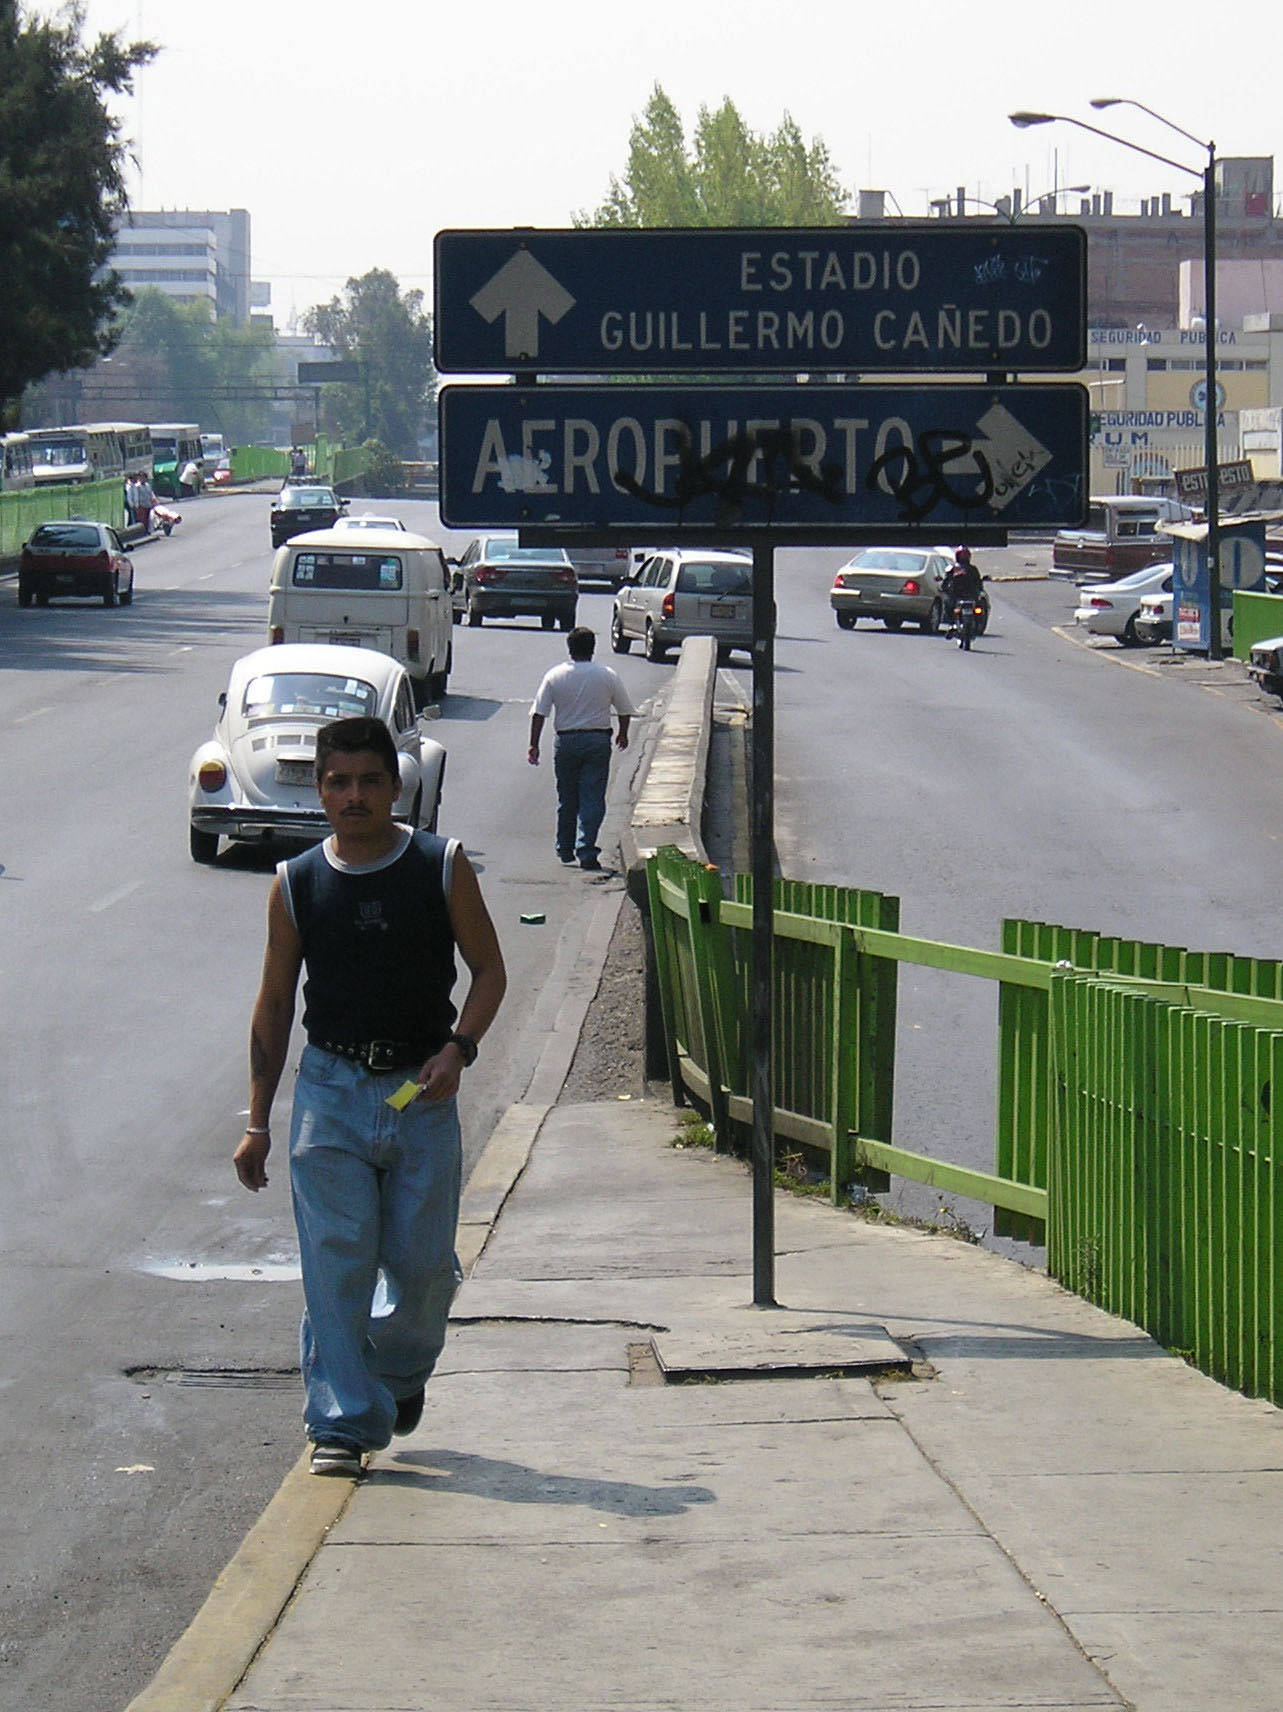 Fig. 29.4 Unsafe pedestrian conditions along a roadway near Mexico City’s metro system.